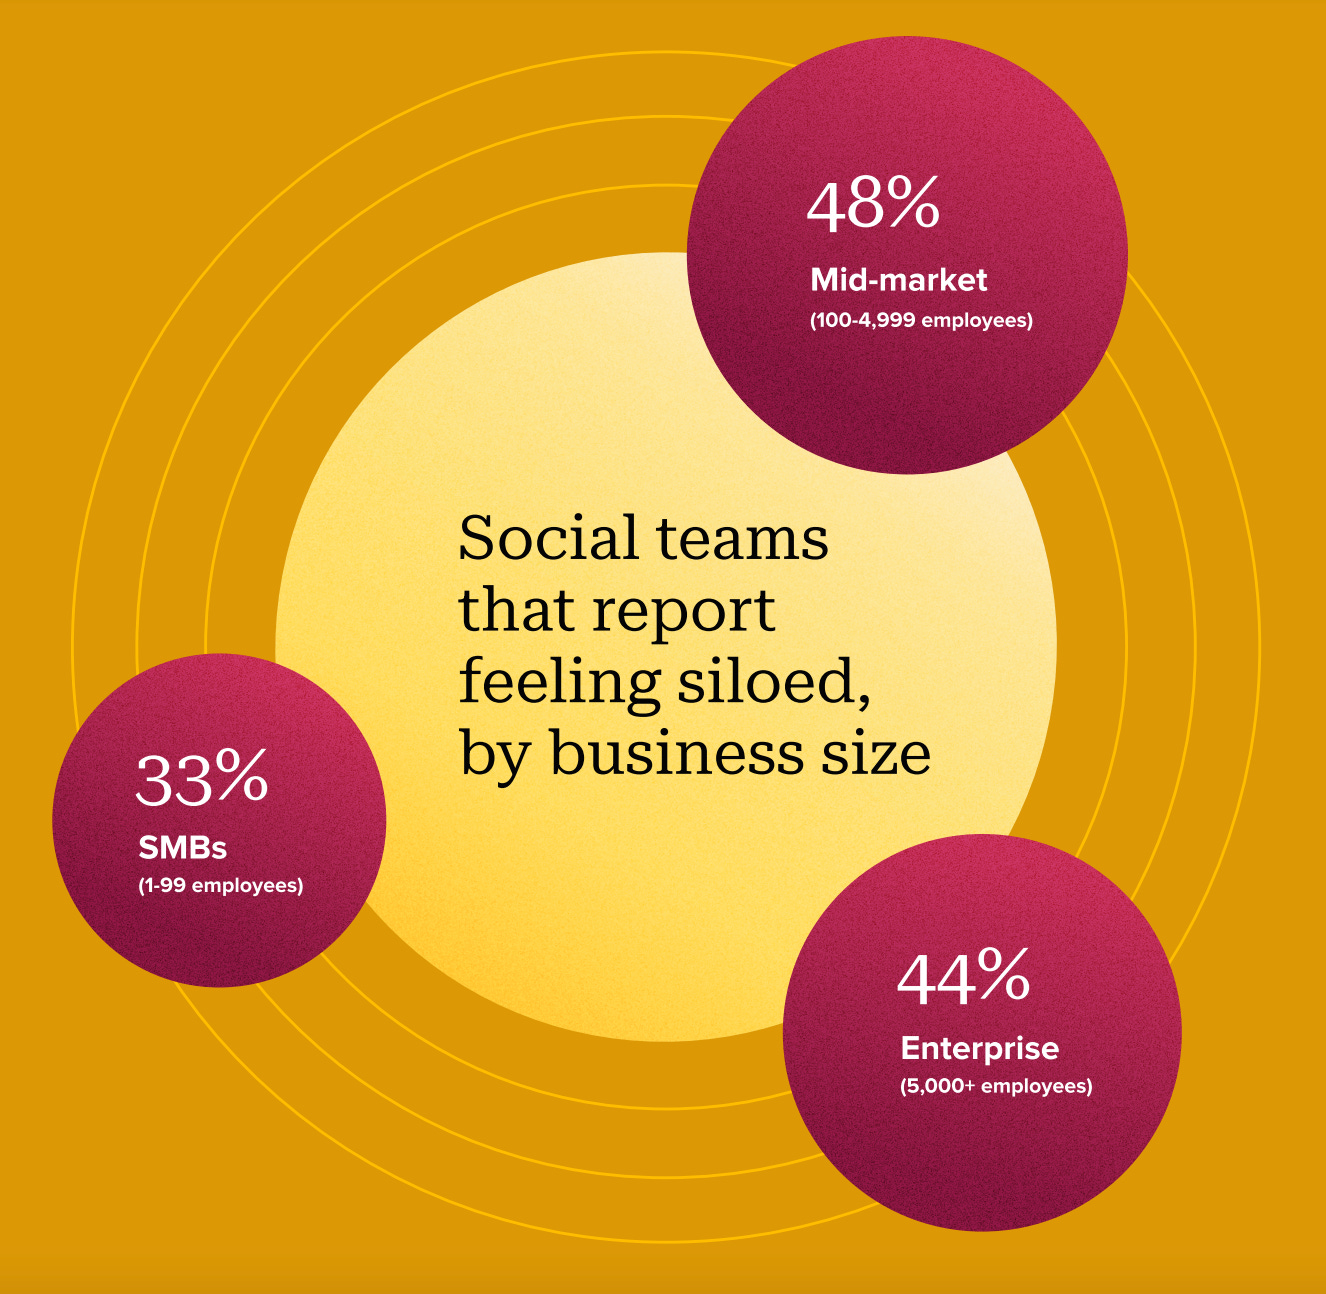 Bubble that says "Social teams that report feeling siloed, by business size. 33% SMBs, 44% Enterprise, 48% midmarket.